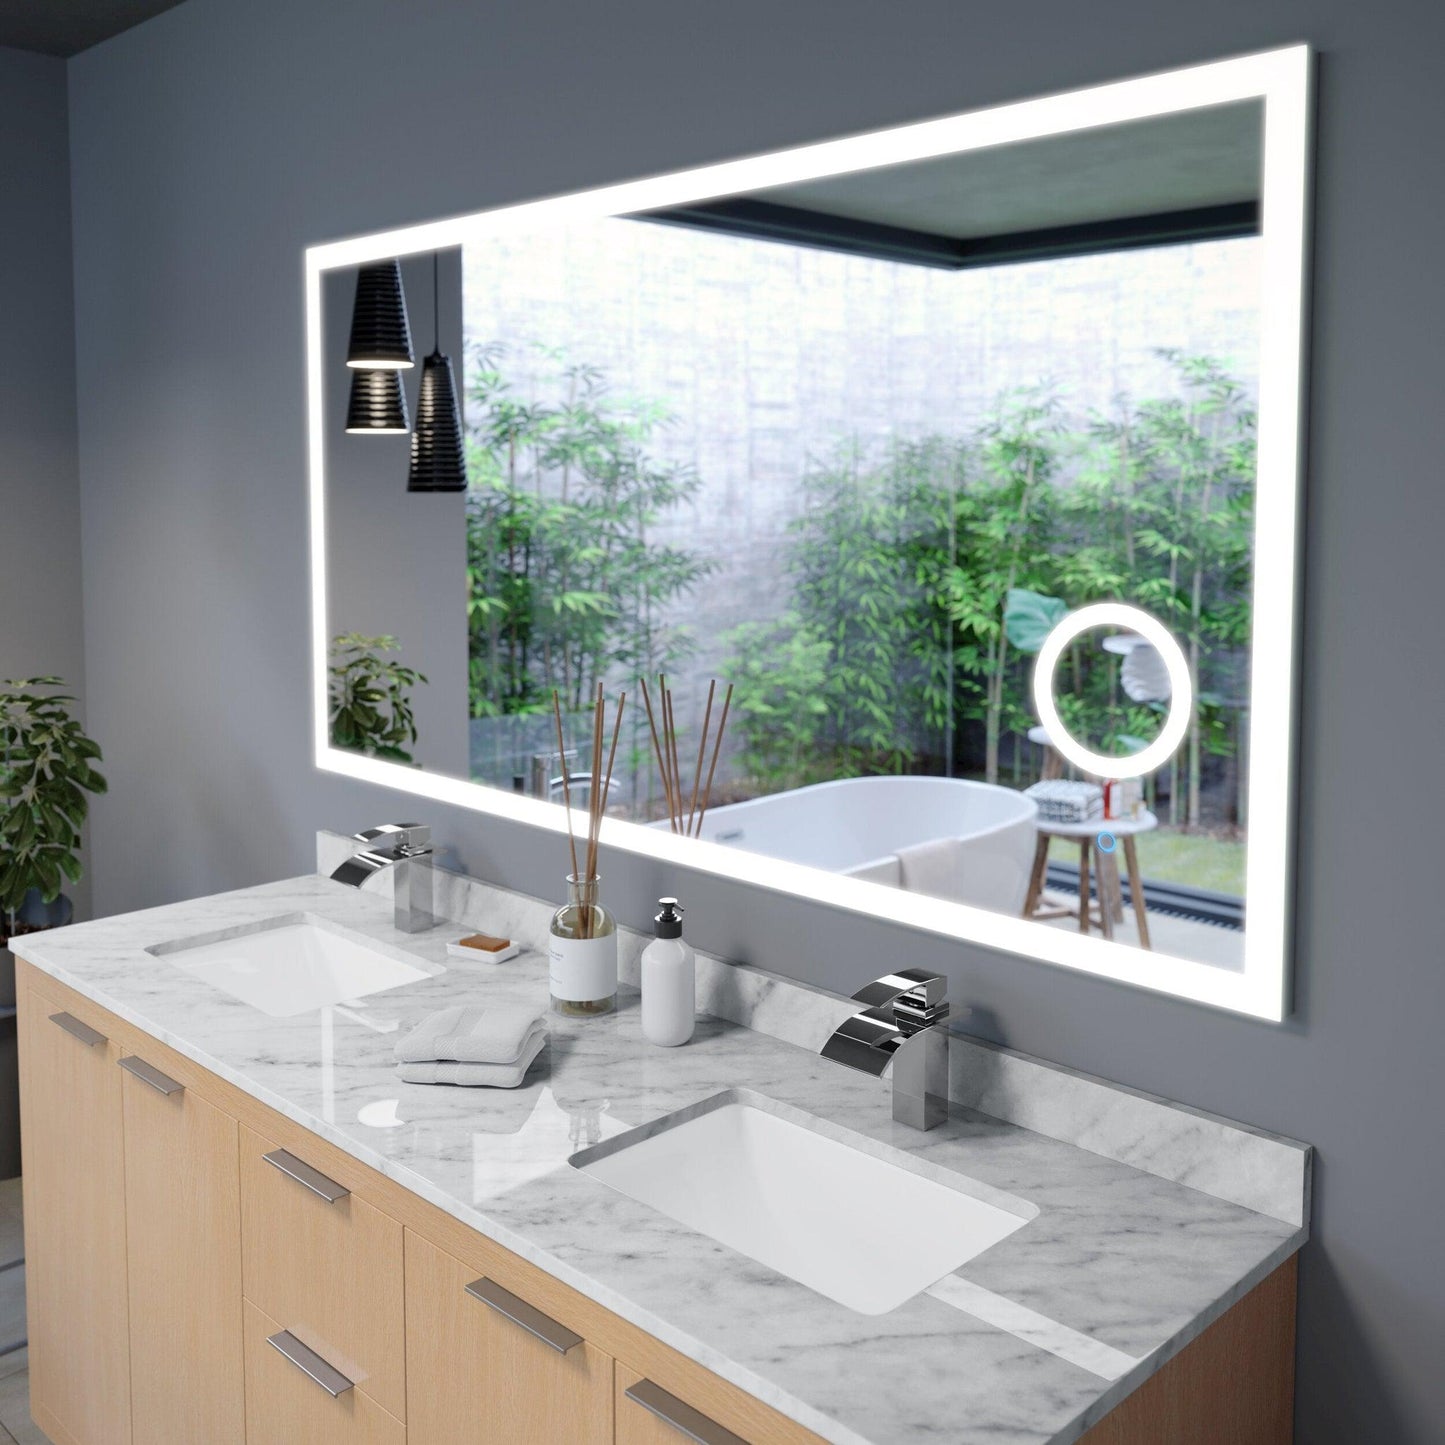 Luxaar Moderna 70" x 36" LED Mirror With Built-in 3x Magnifying Mirror, Memory Dimmer & Defogger